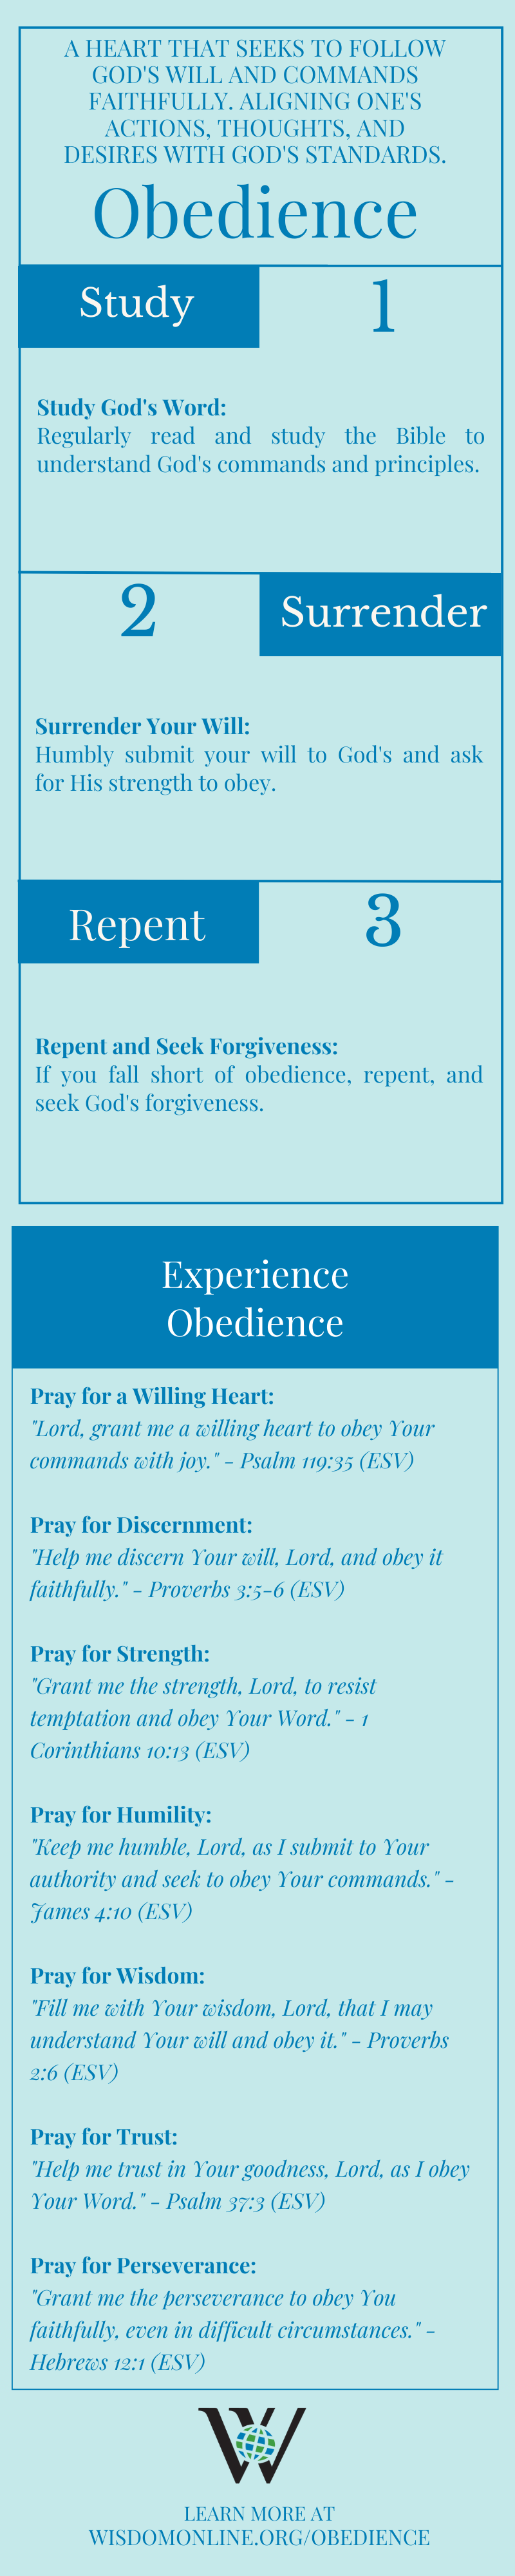 Infographic on the biblical quality of obedience.